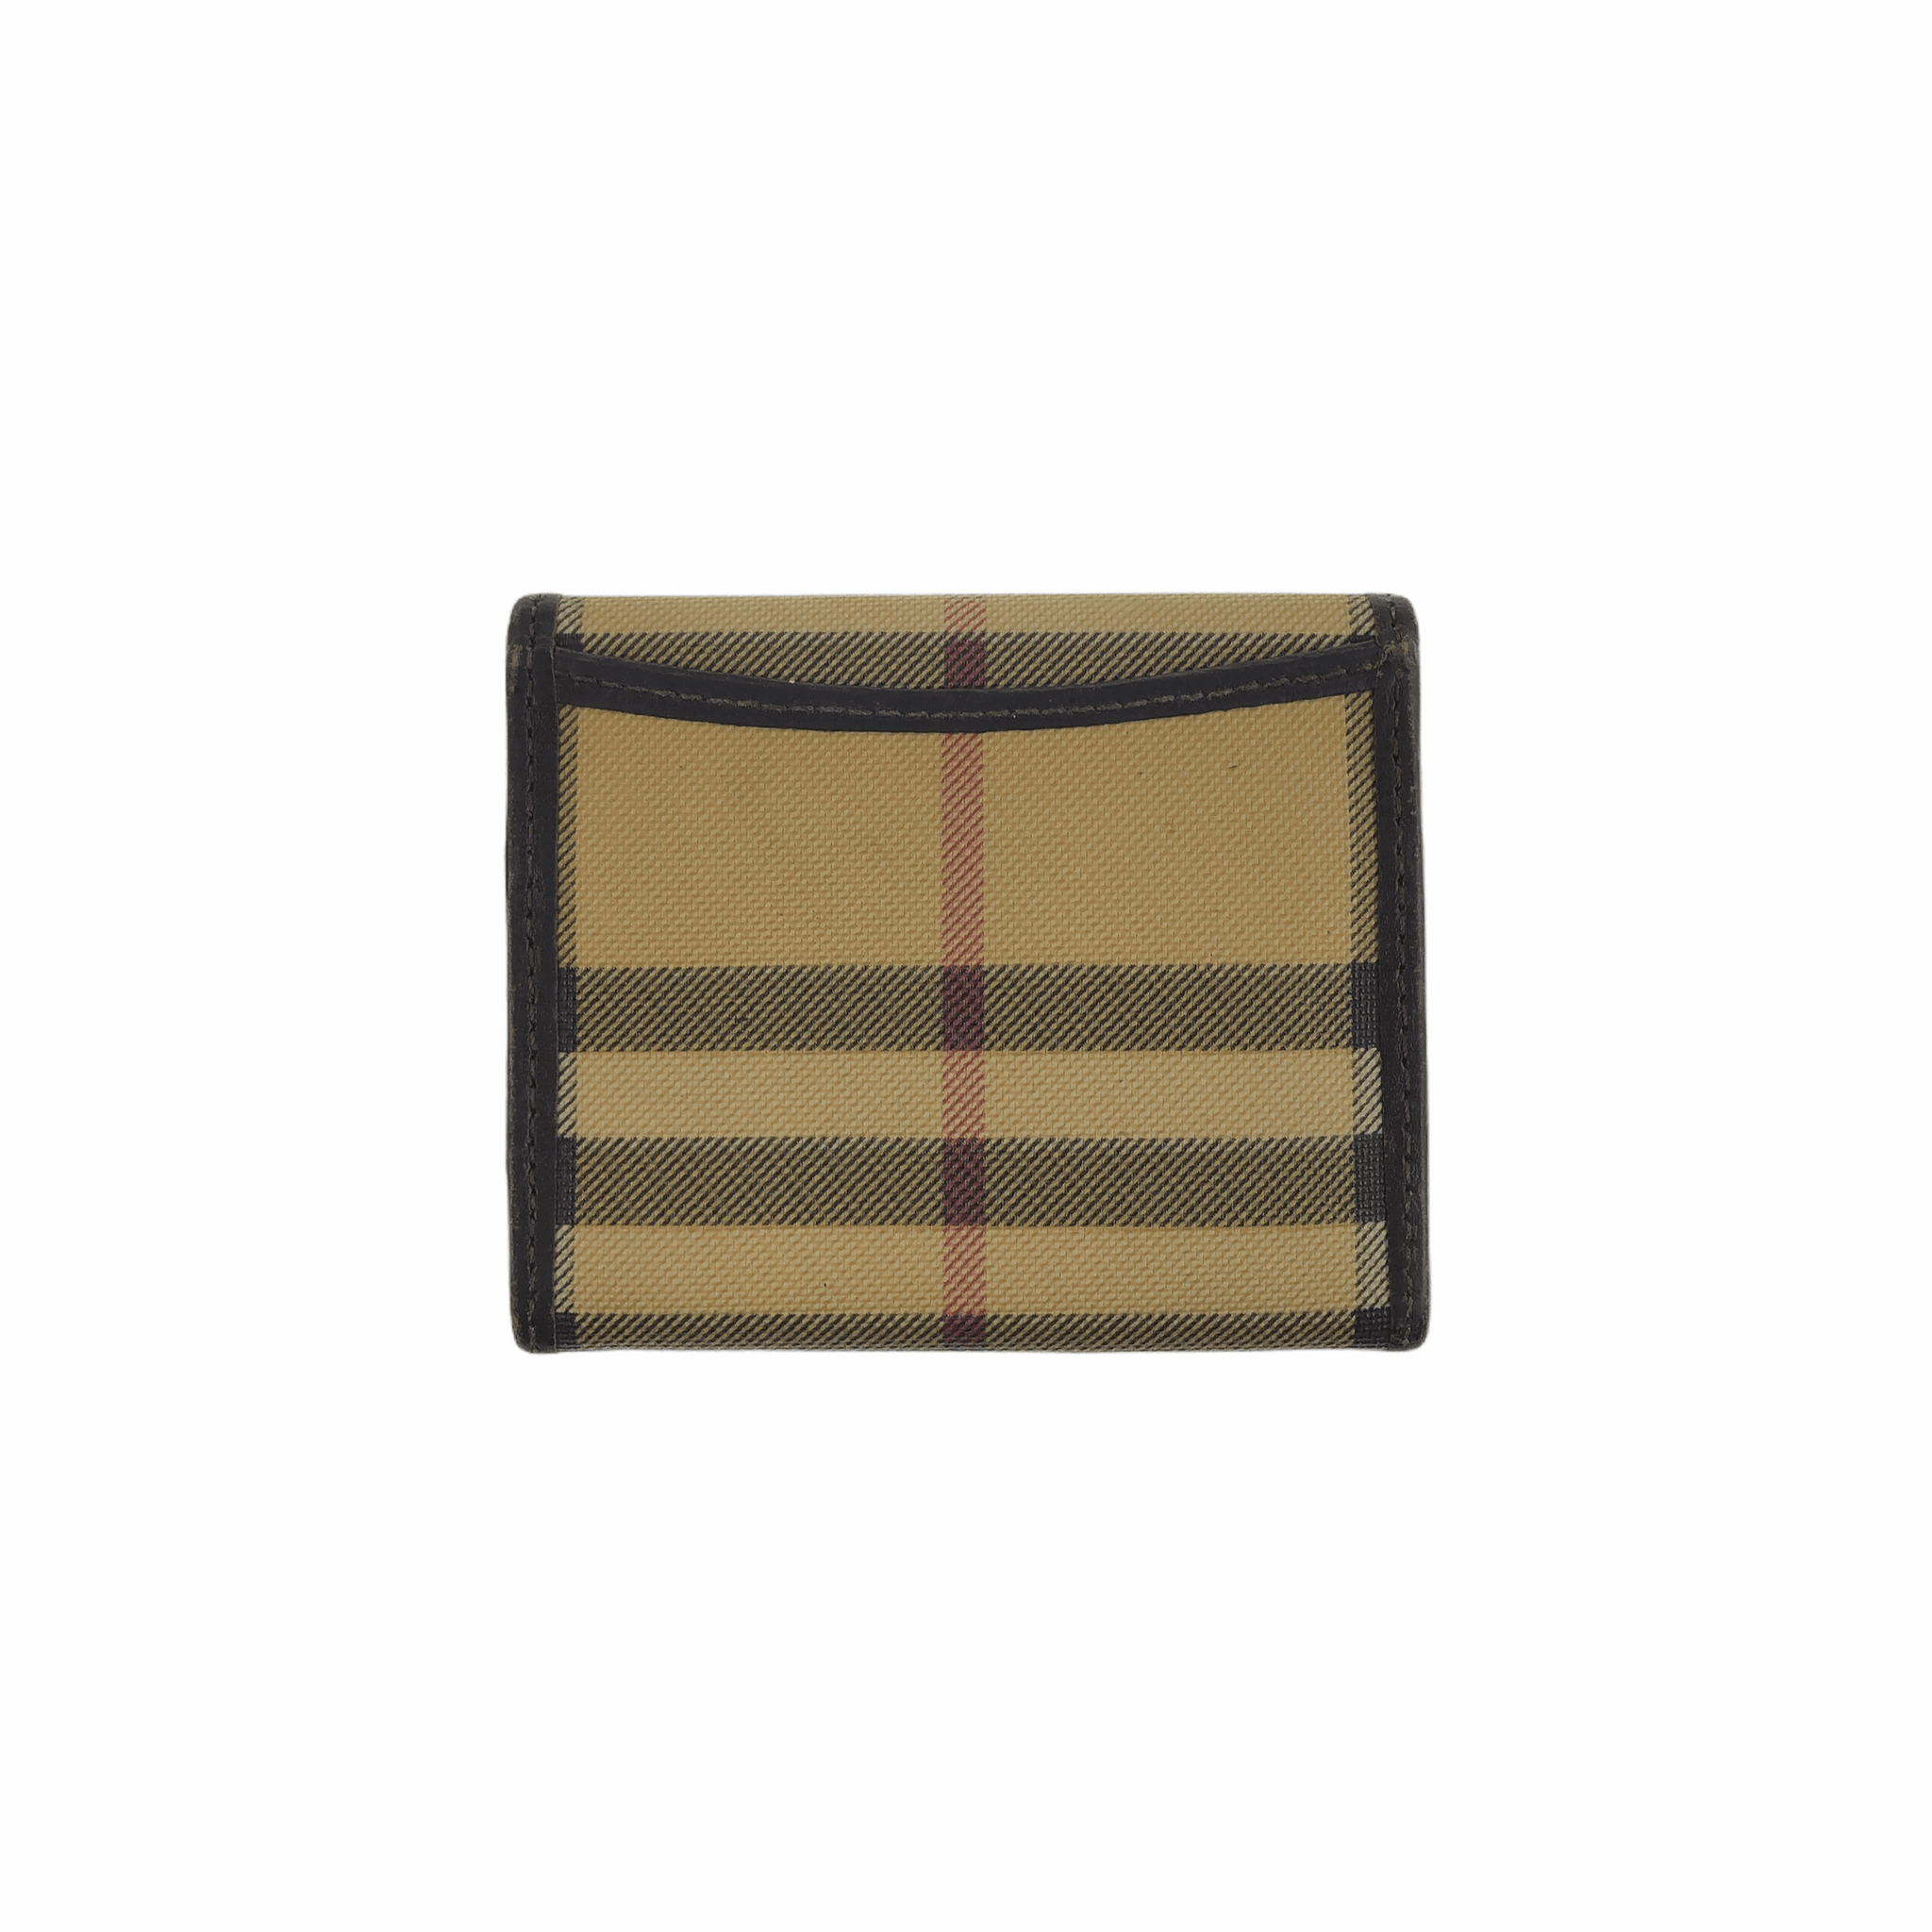 Burberry Coin Purse Wallets for Women